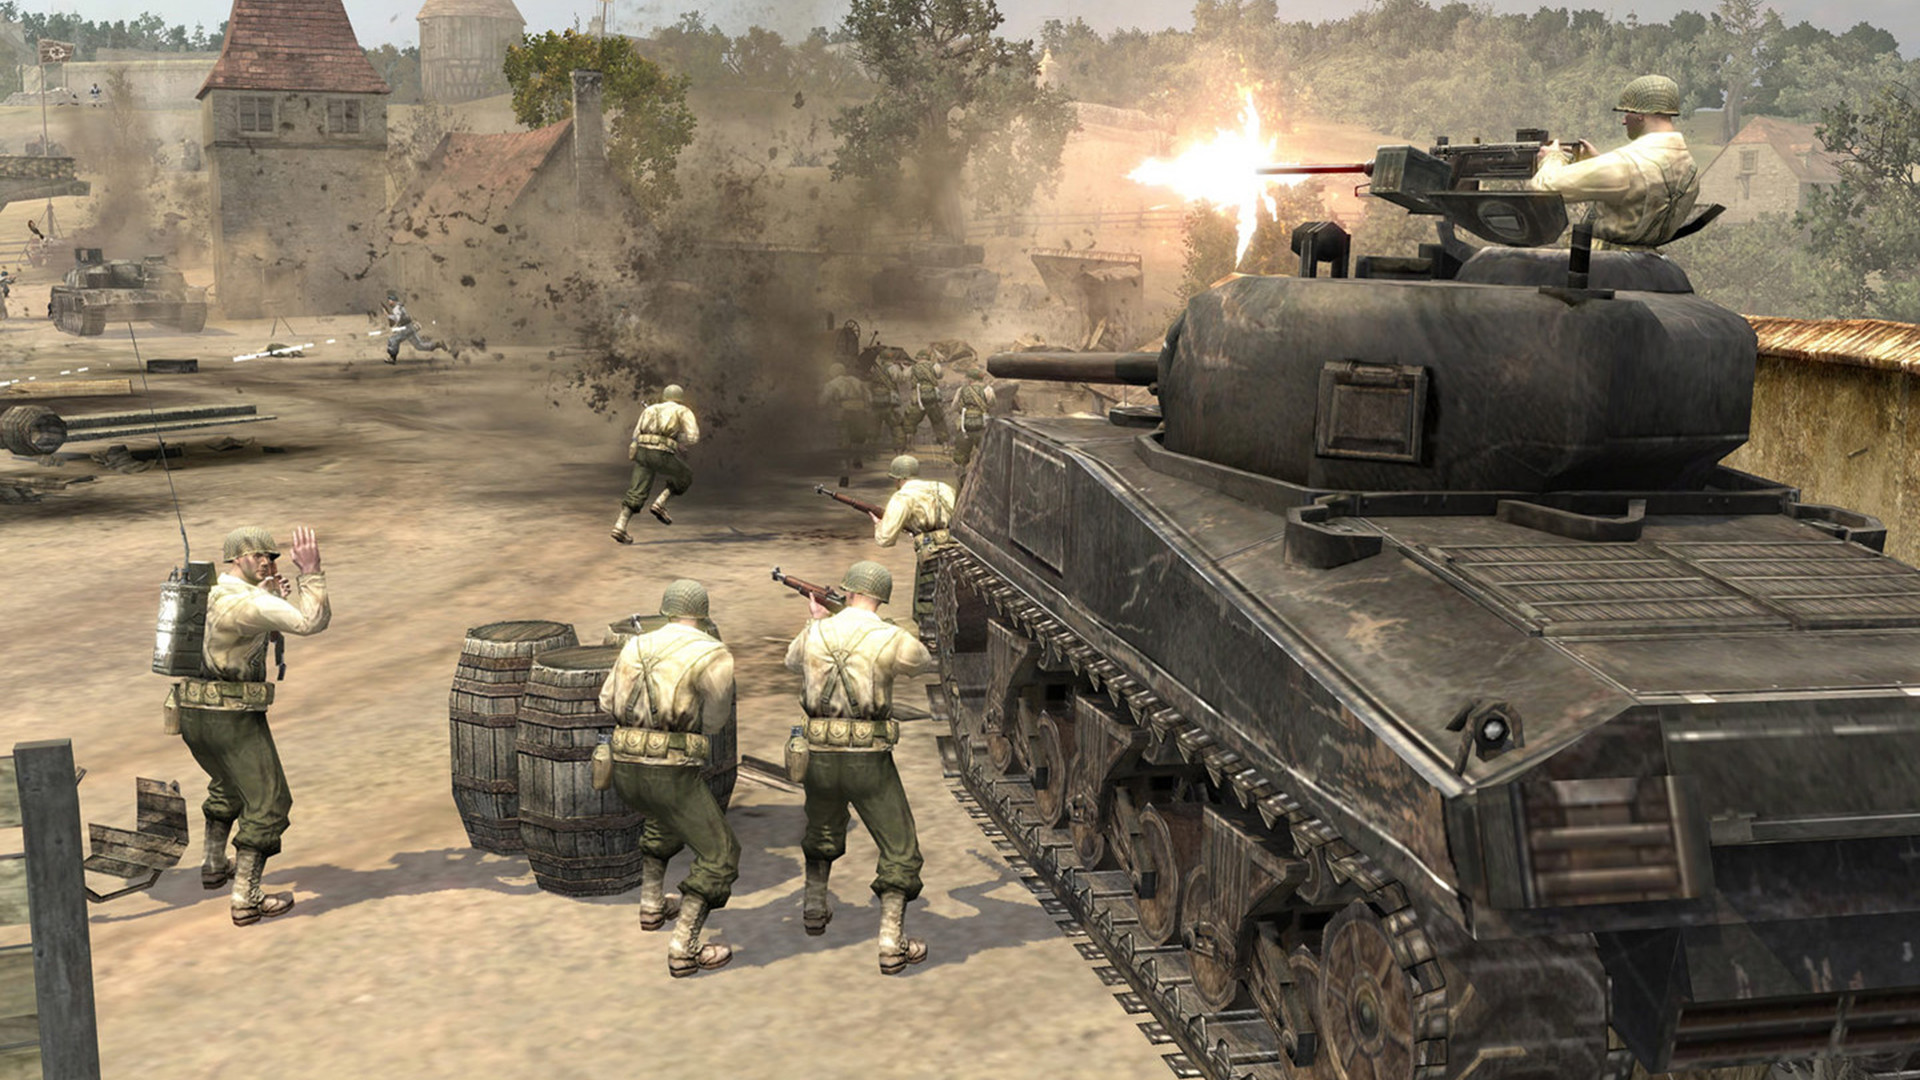 Company of Heroes 3 Development Shown Off In New Video – Gameranx